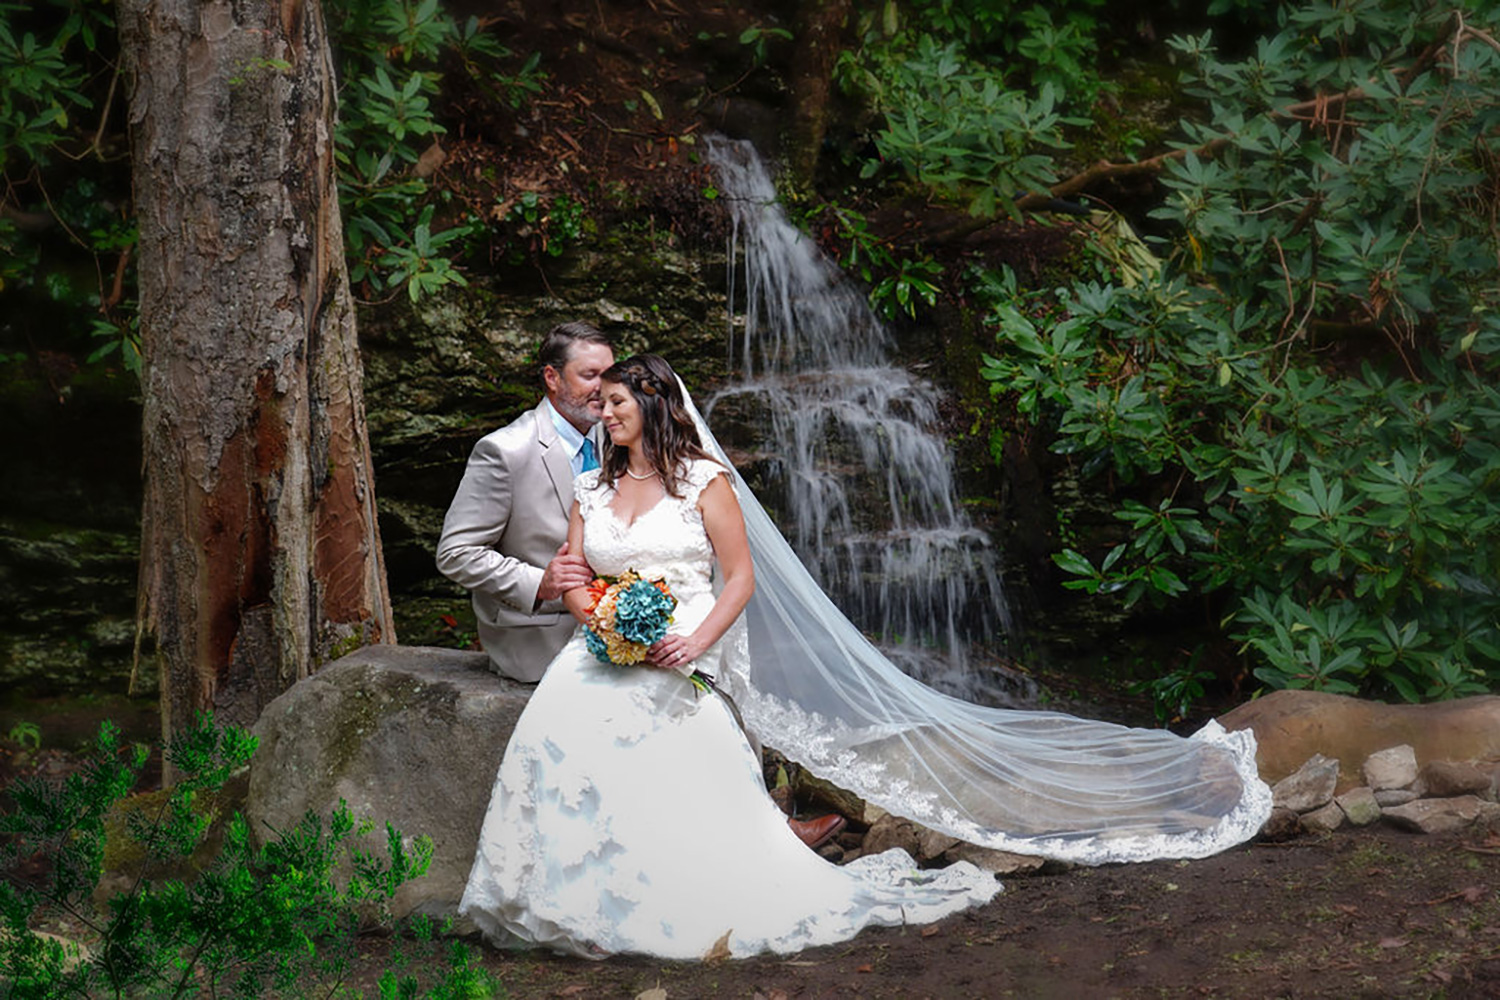 bride and groom sitting on a rock by a tall tree in the forest with a Smoky mountain waterfall behind them